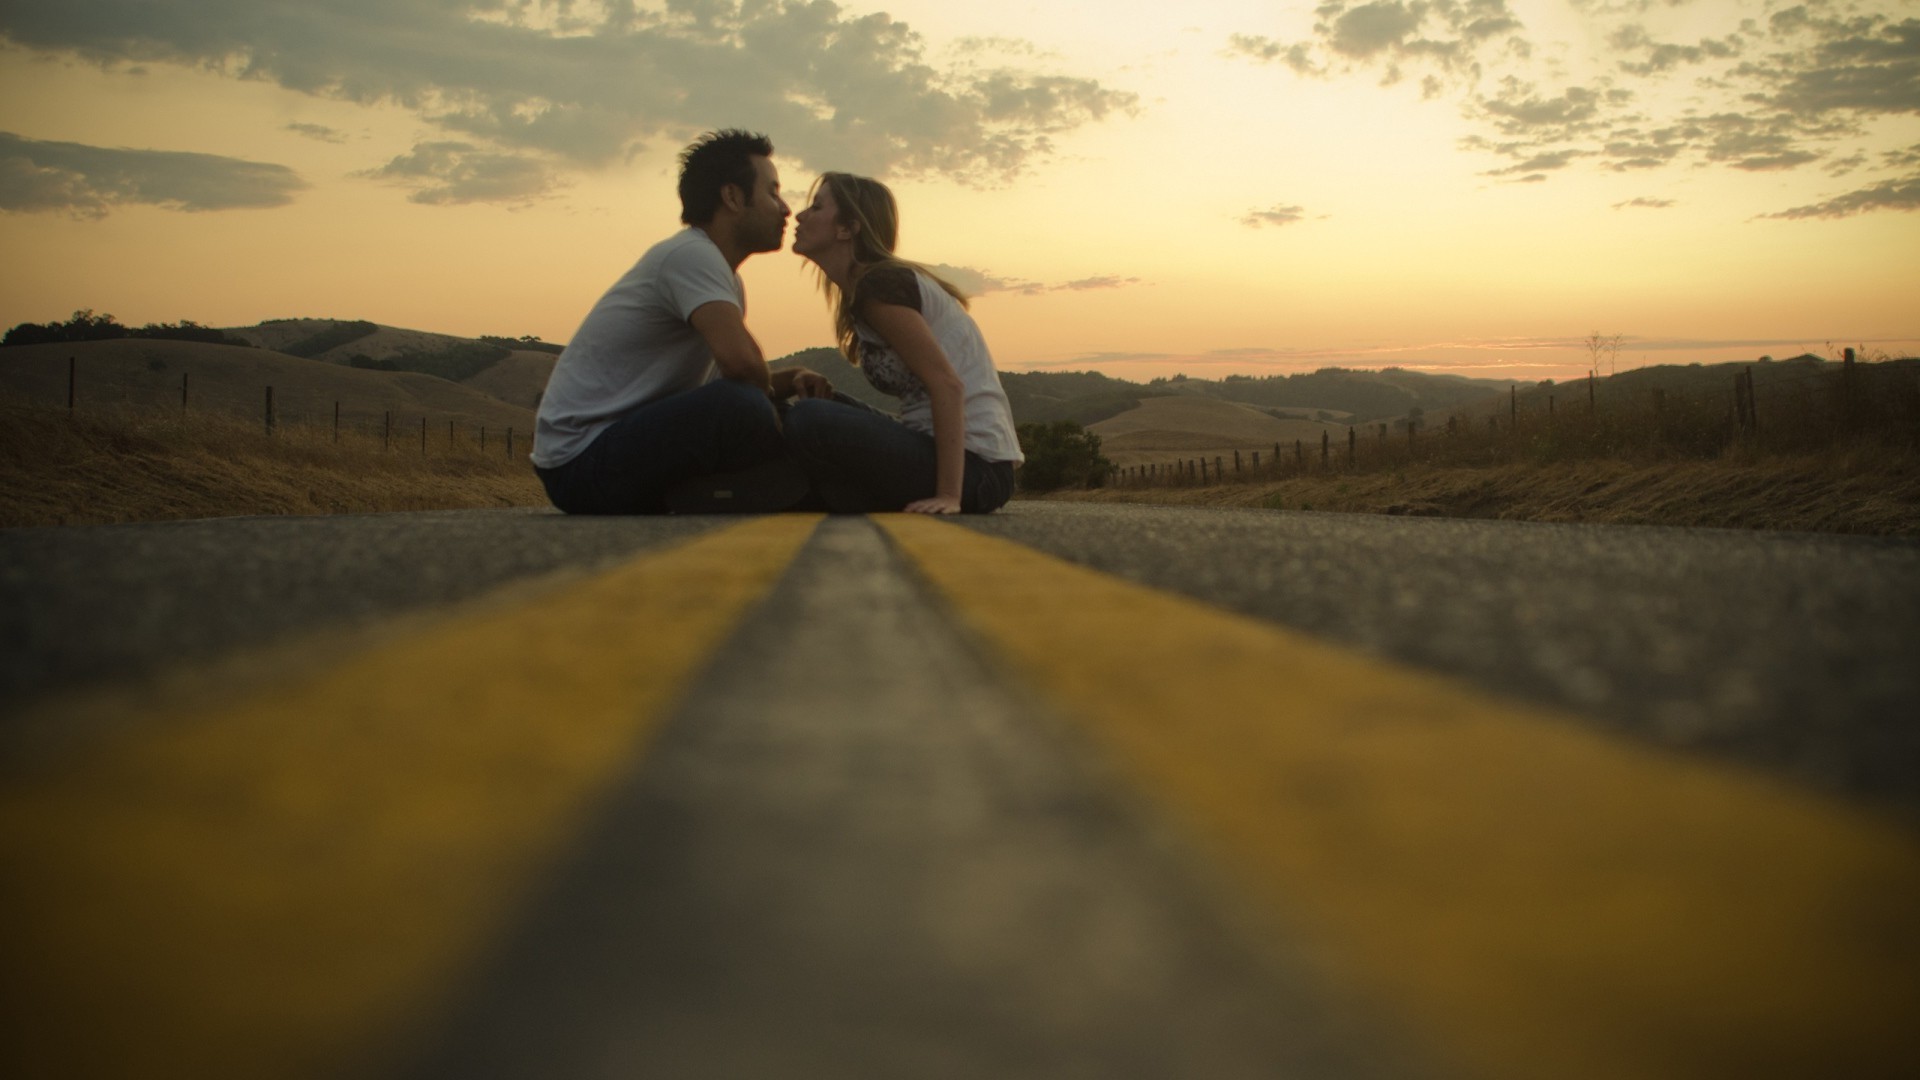 couples sunset landscape girl travel sky evening light water adult beach love blur dawn couple road two lake woman nature